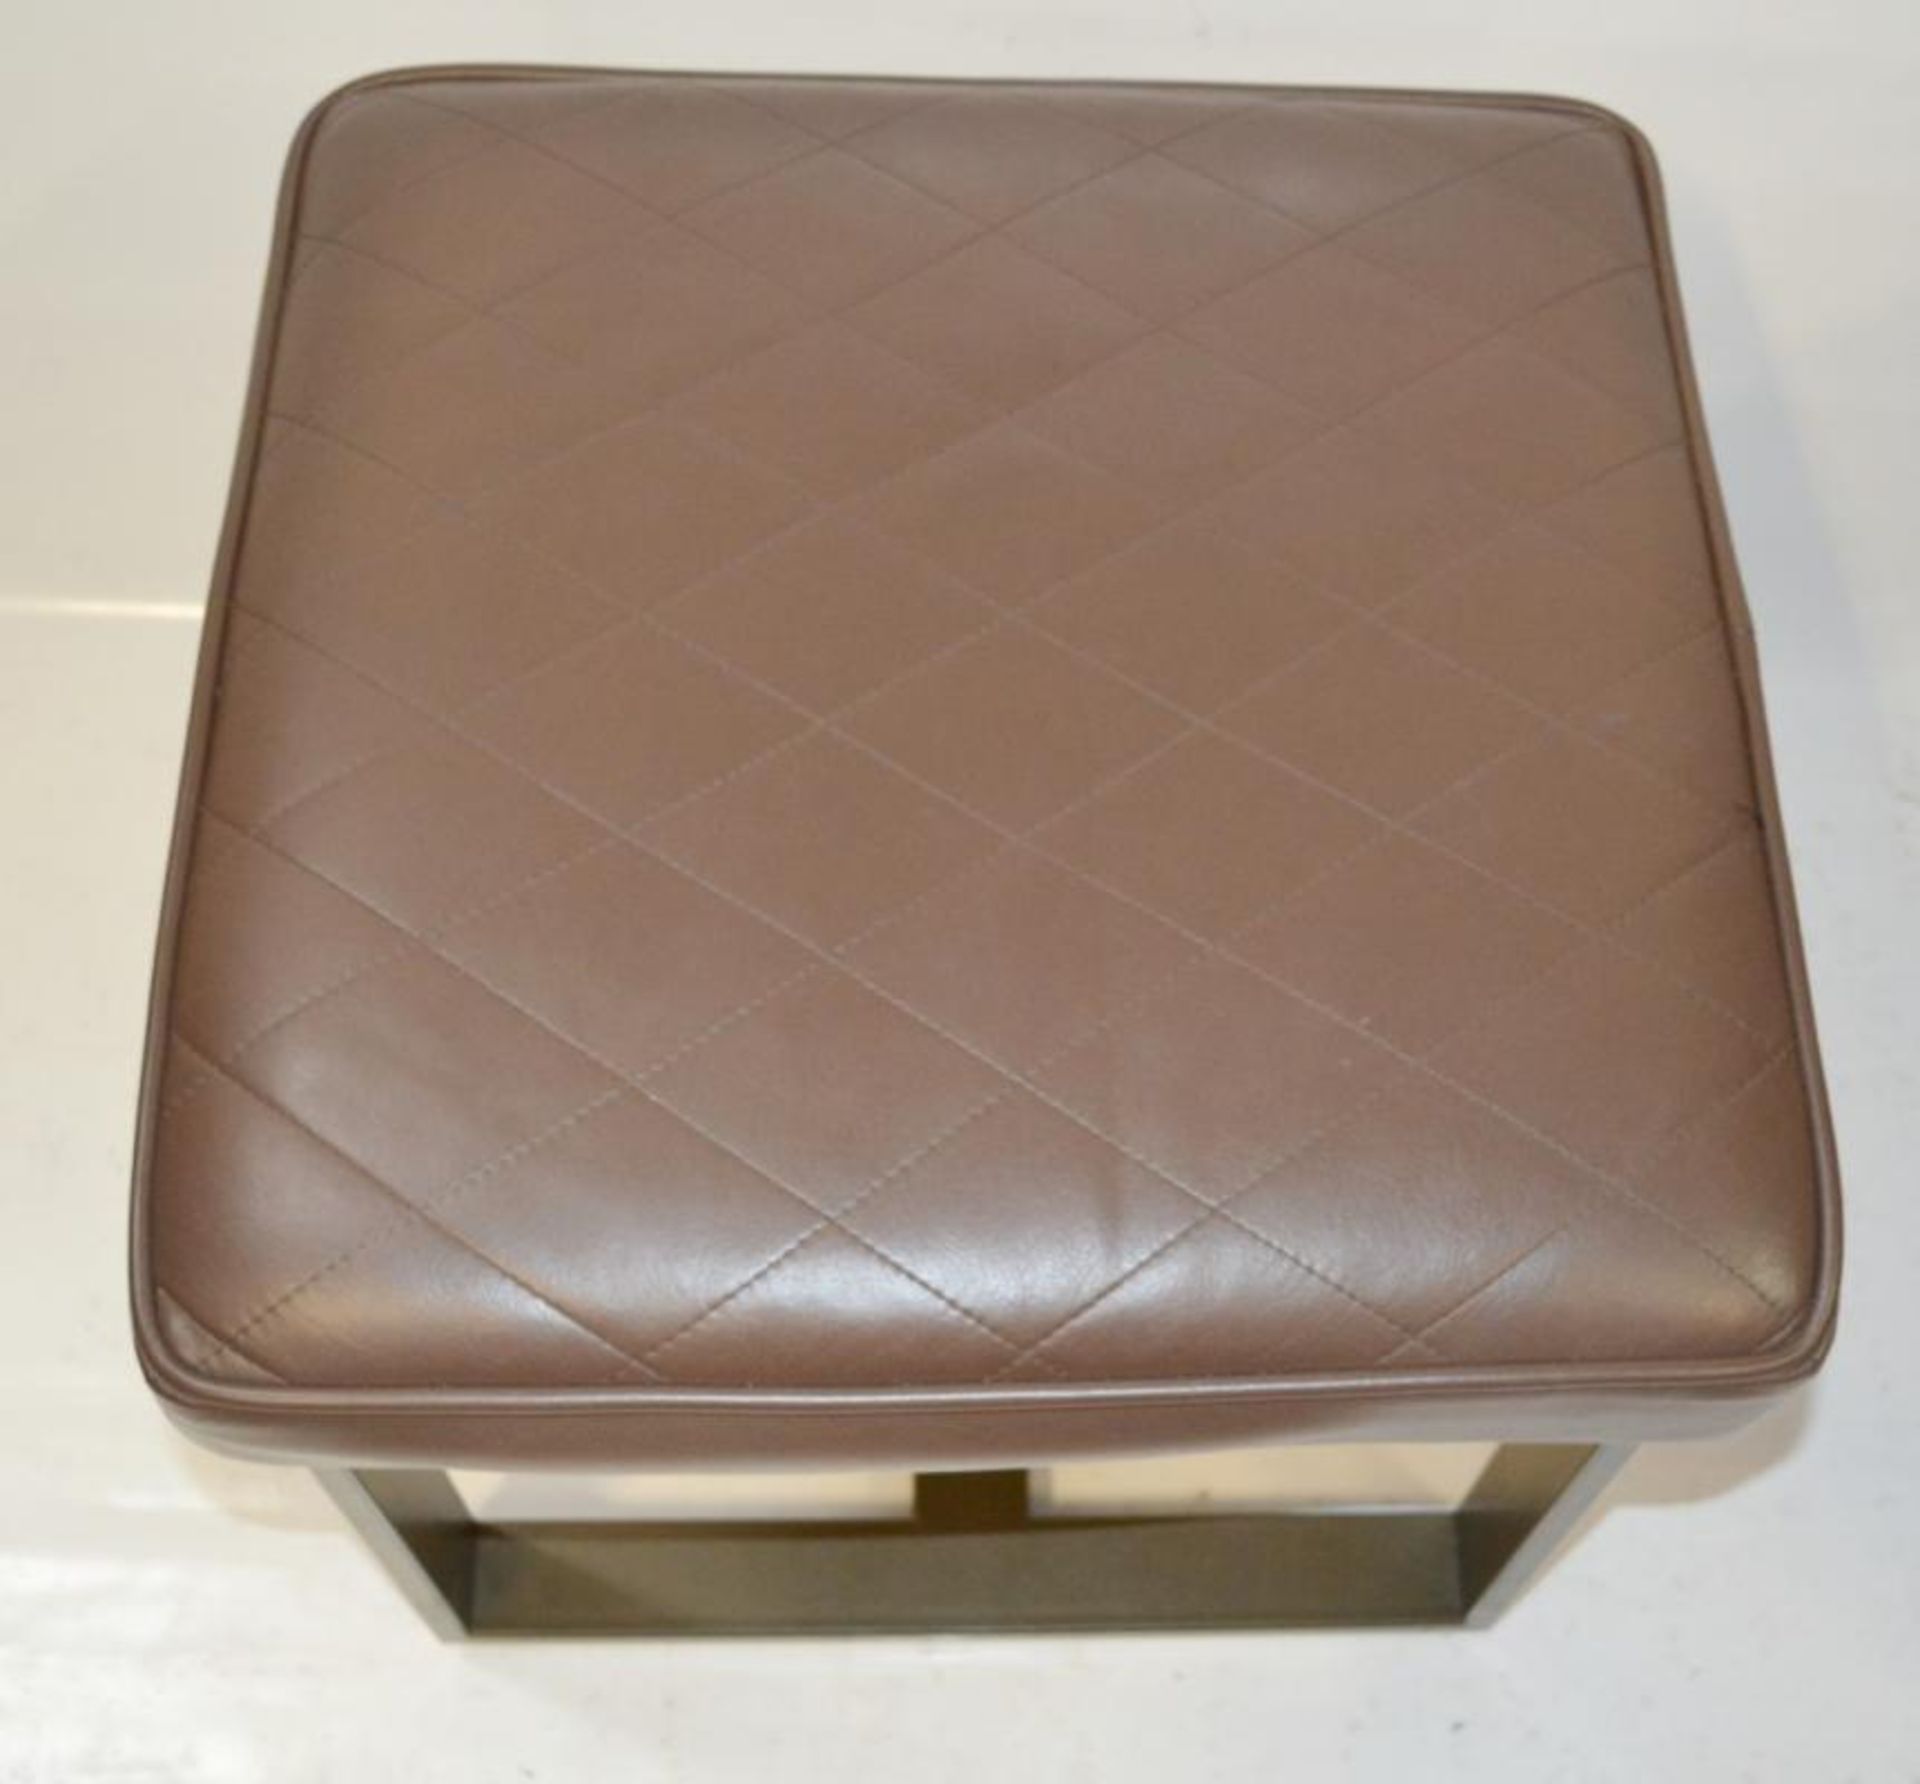 Pair Of Upholstered Stools In A Brown Faux Leather - Recently Removed From A Major UK Store In Very - Image 4 of 5